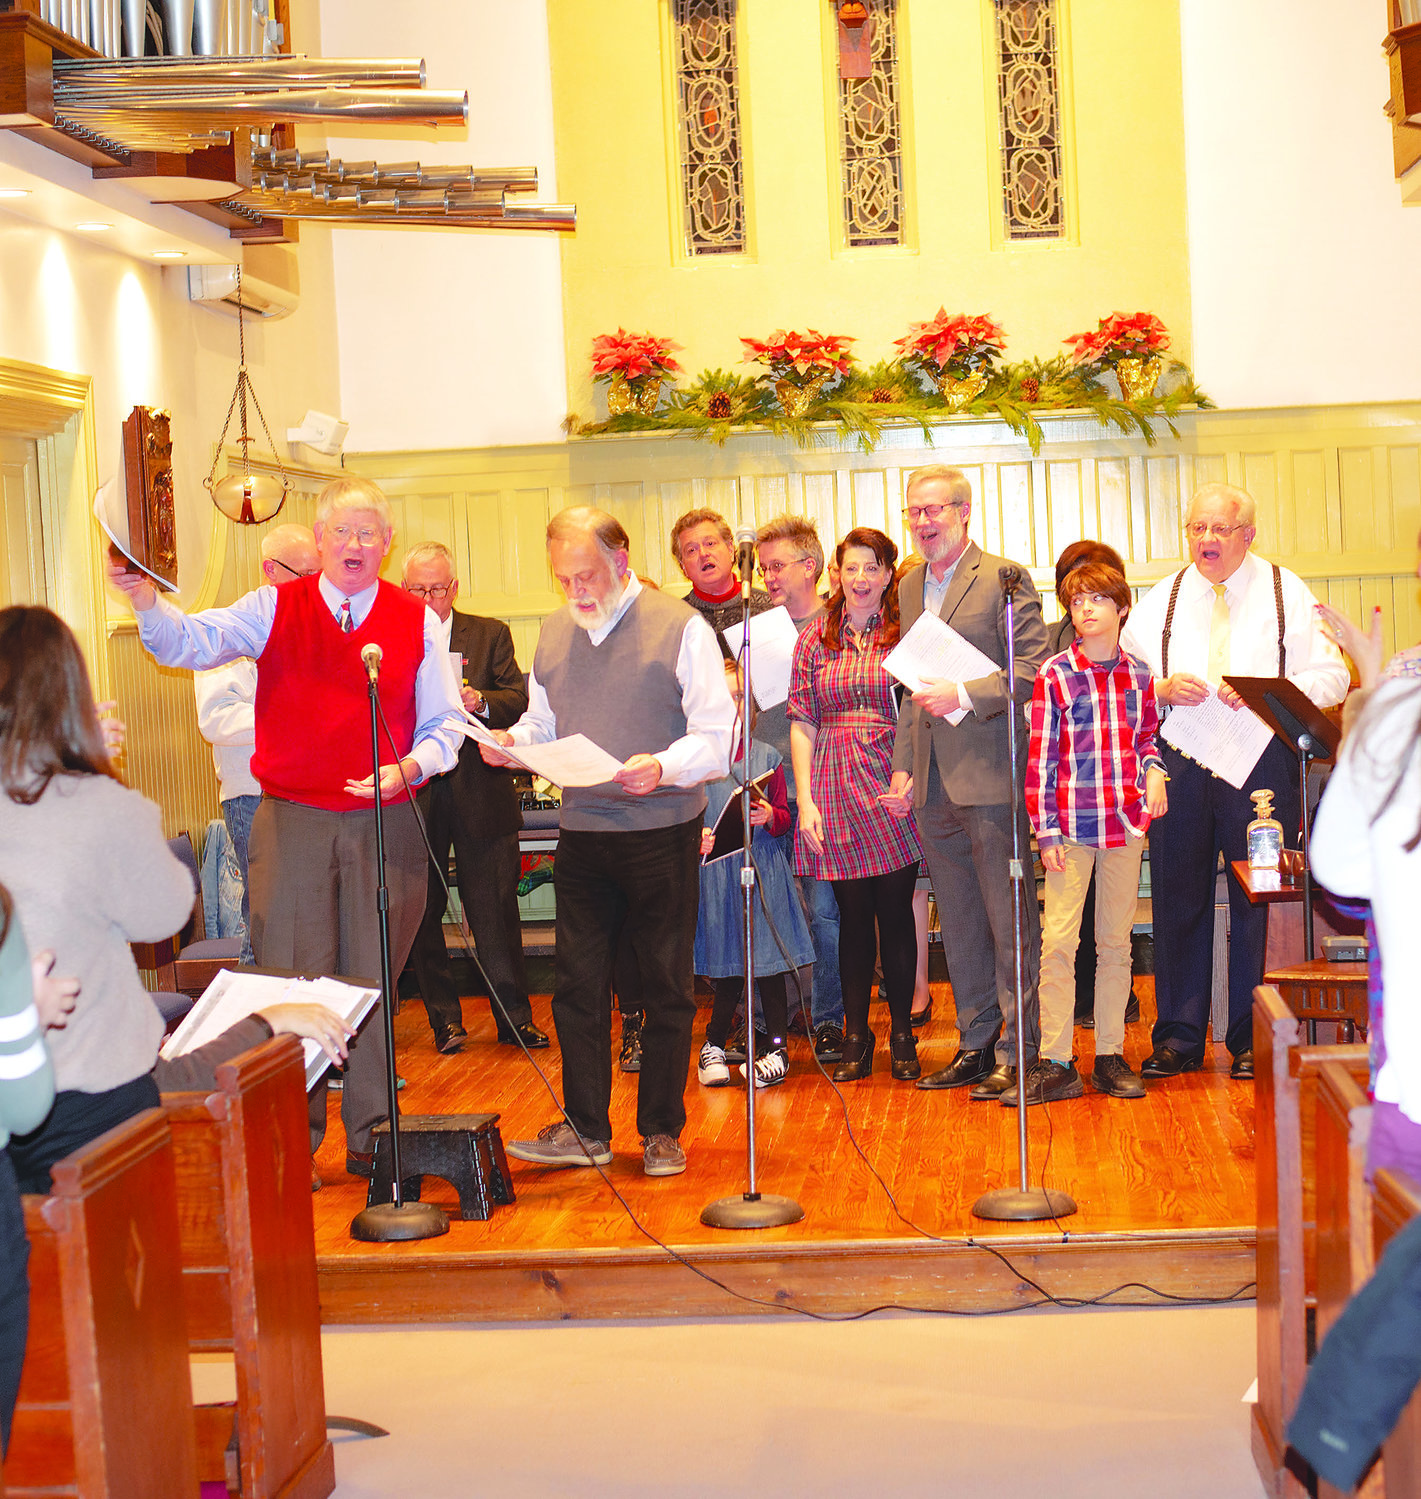 The cast of “It’s a Wonderful Life Radio Play” performs at St. Andrew’s Episcopal Church in Yardley during a fundraiser for a local food pantry.